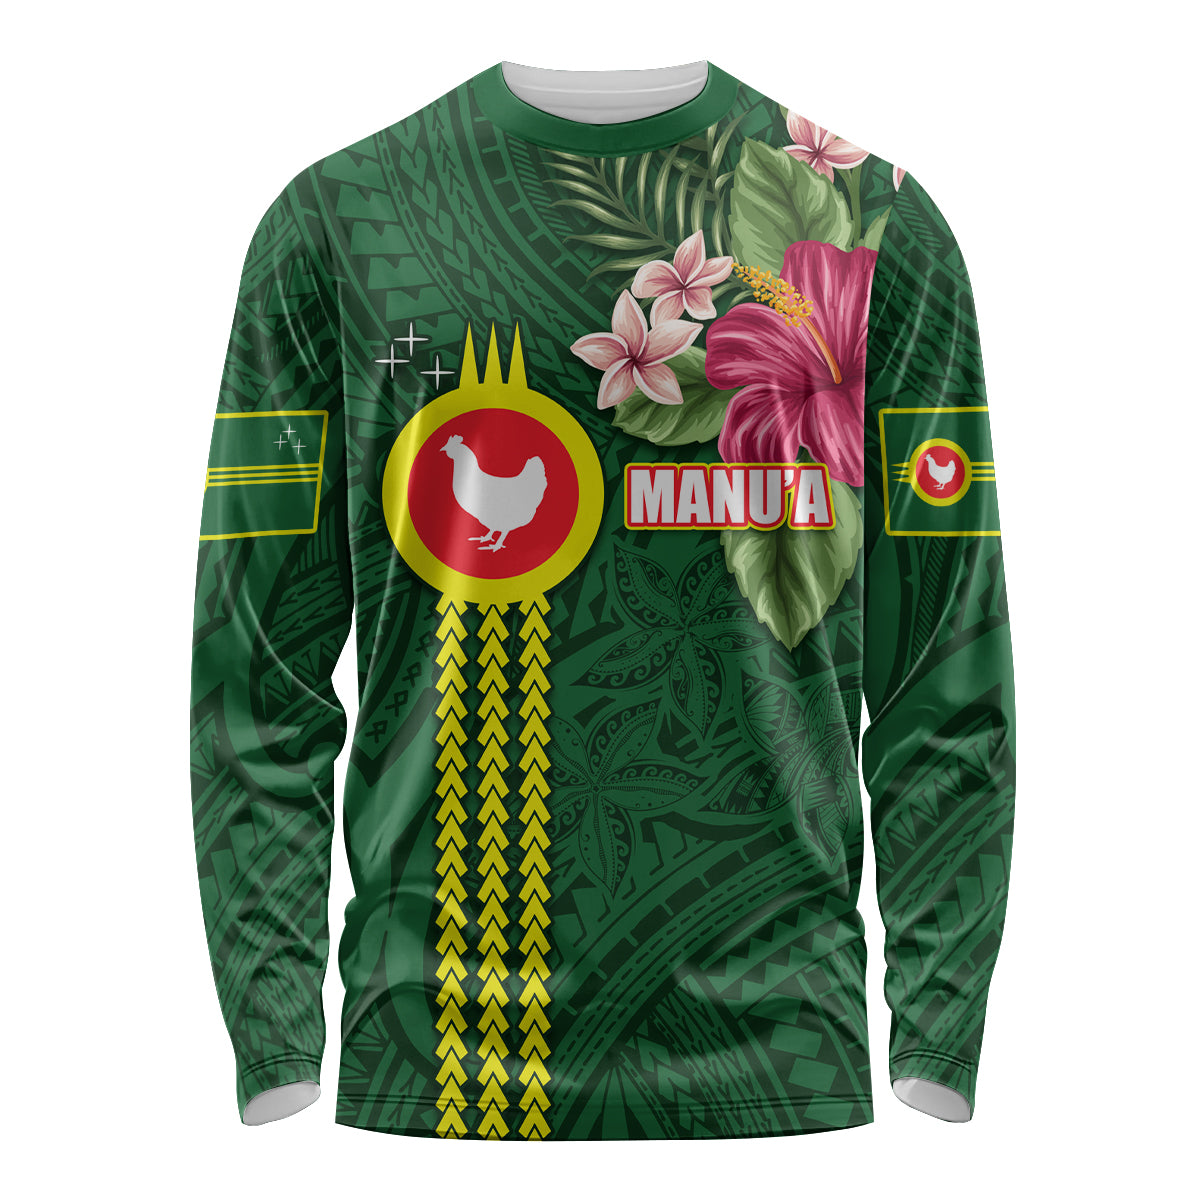 Manu'a Cession Day 120th Anniversary Long Sleeve Shirt Polynesian Pattern and Hibiscus Flower